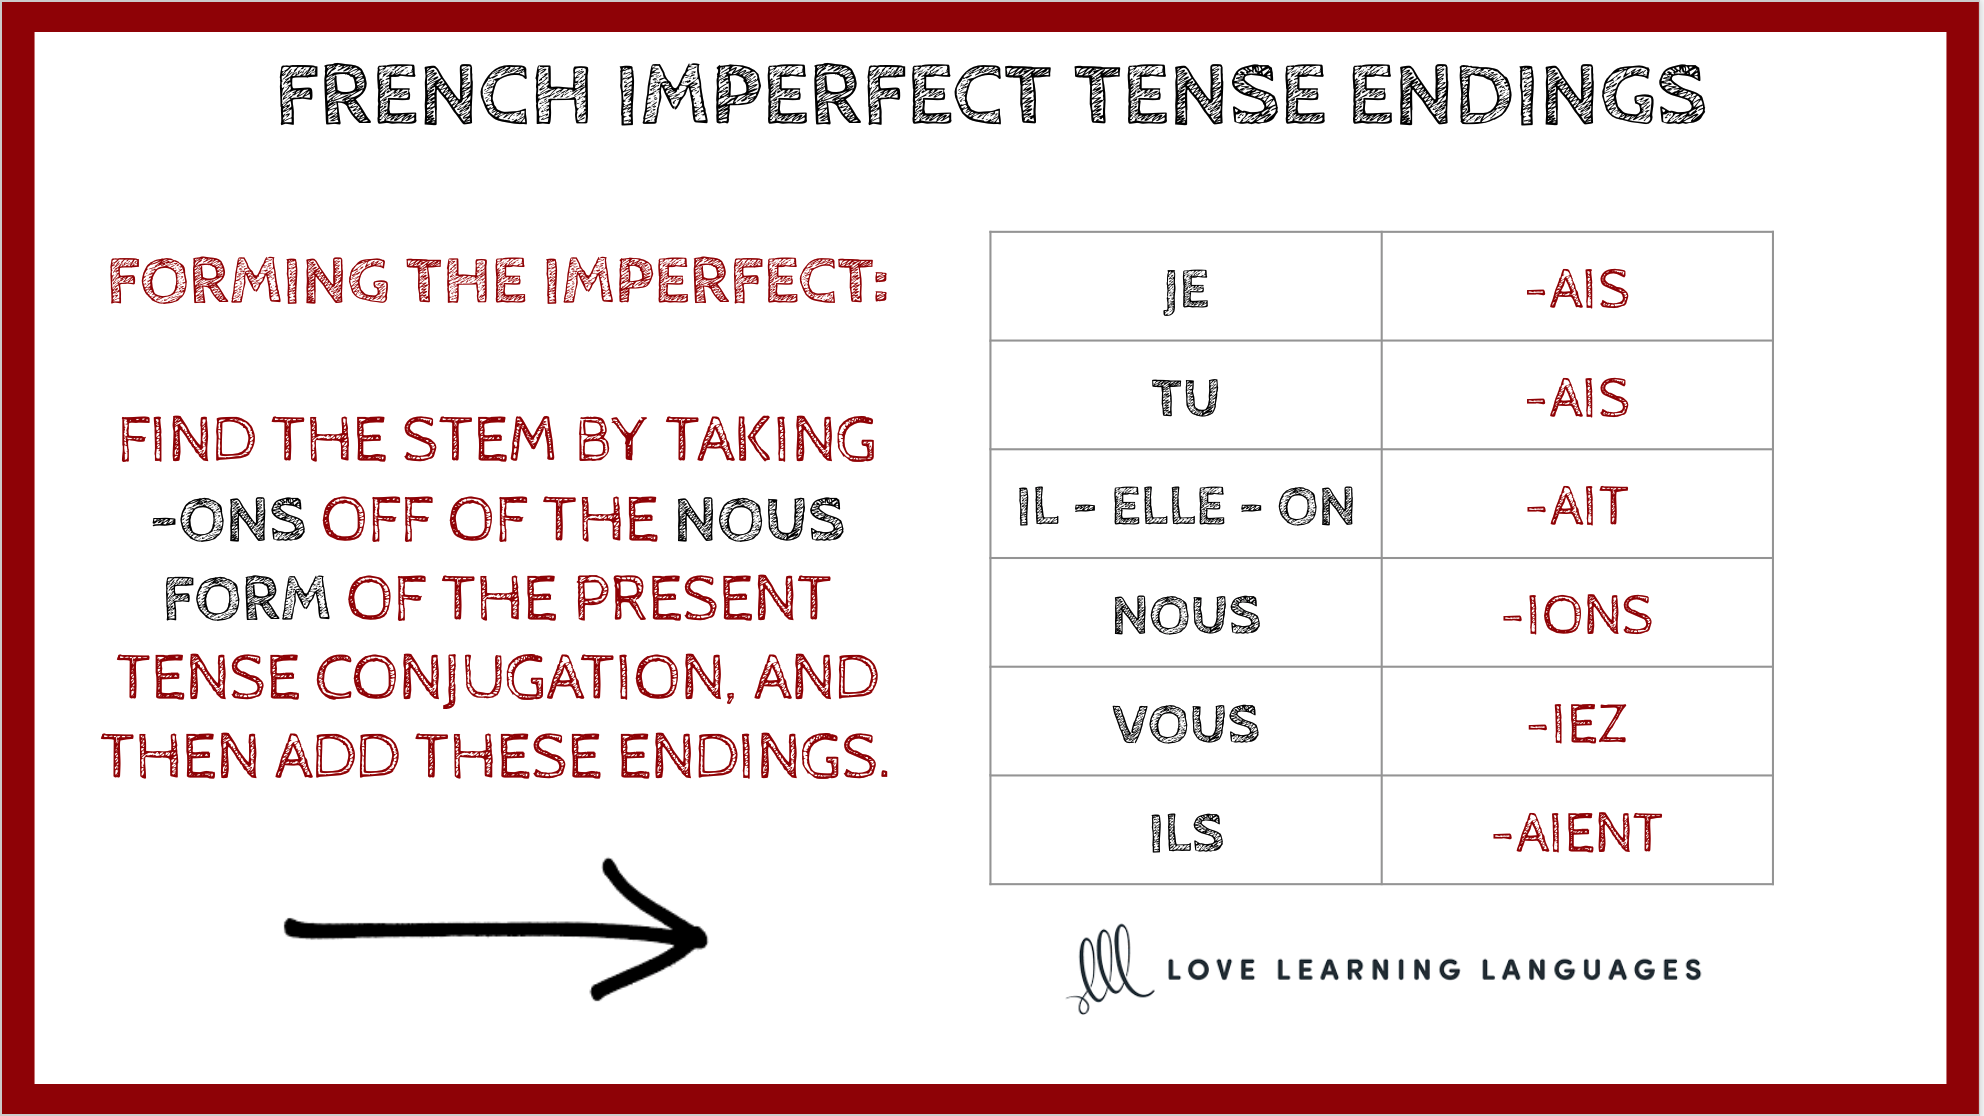 french-imperfect-tense-endings-by-themflteacher-teaching-resources